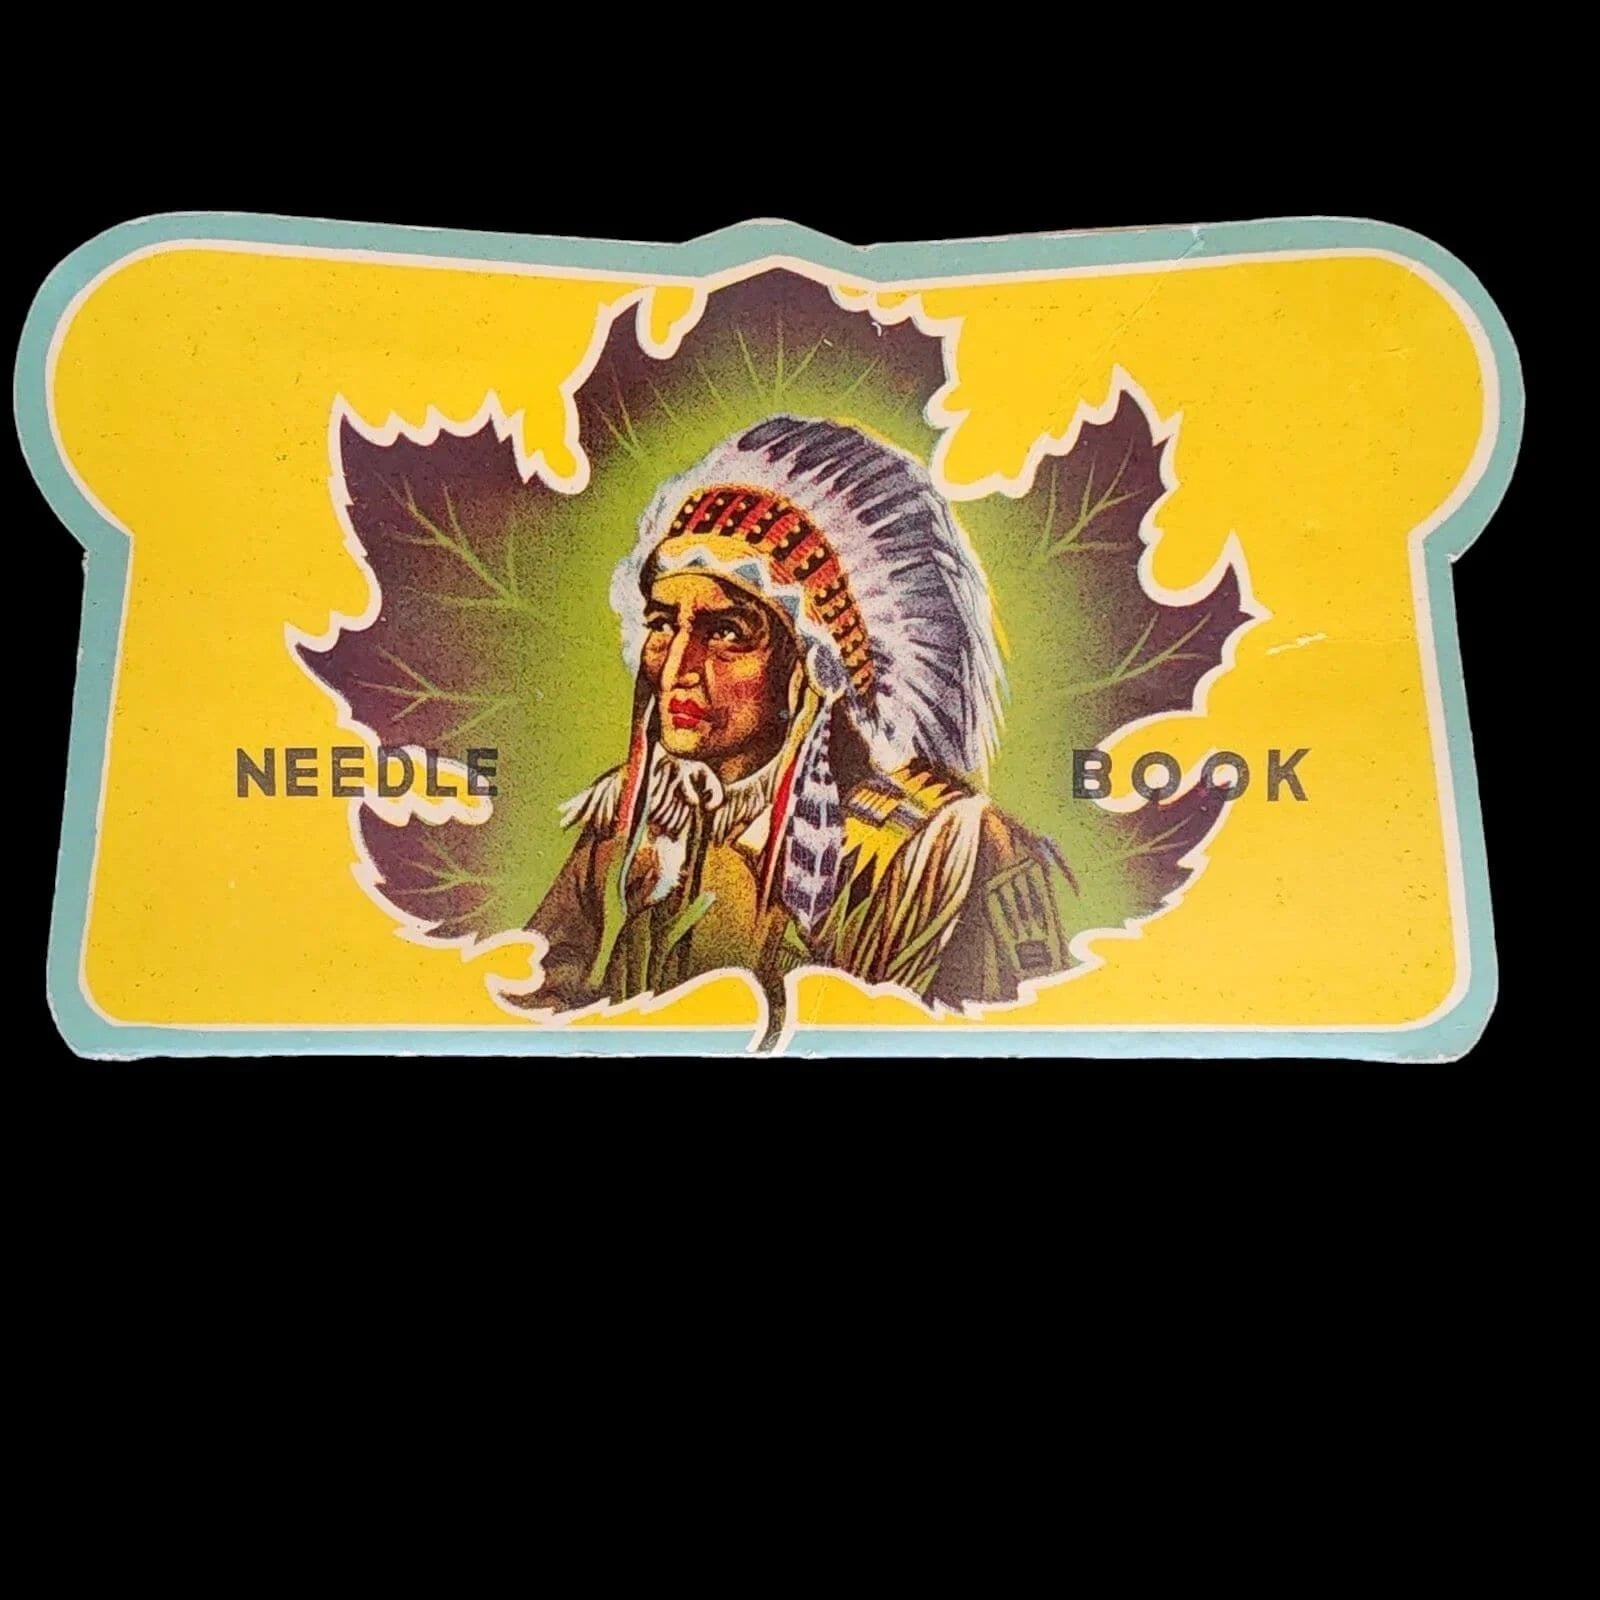 Needle pouch featuring an Indian chief, traditional headdress, and feathers, representing Native American culture.